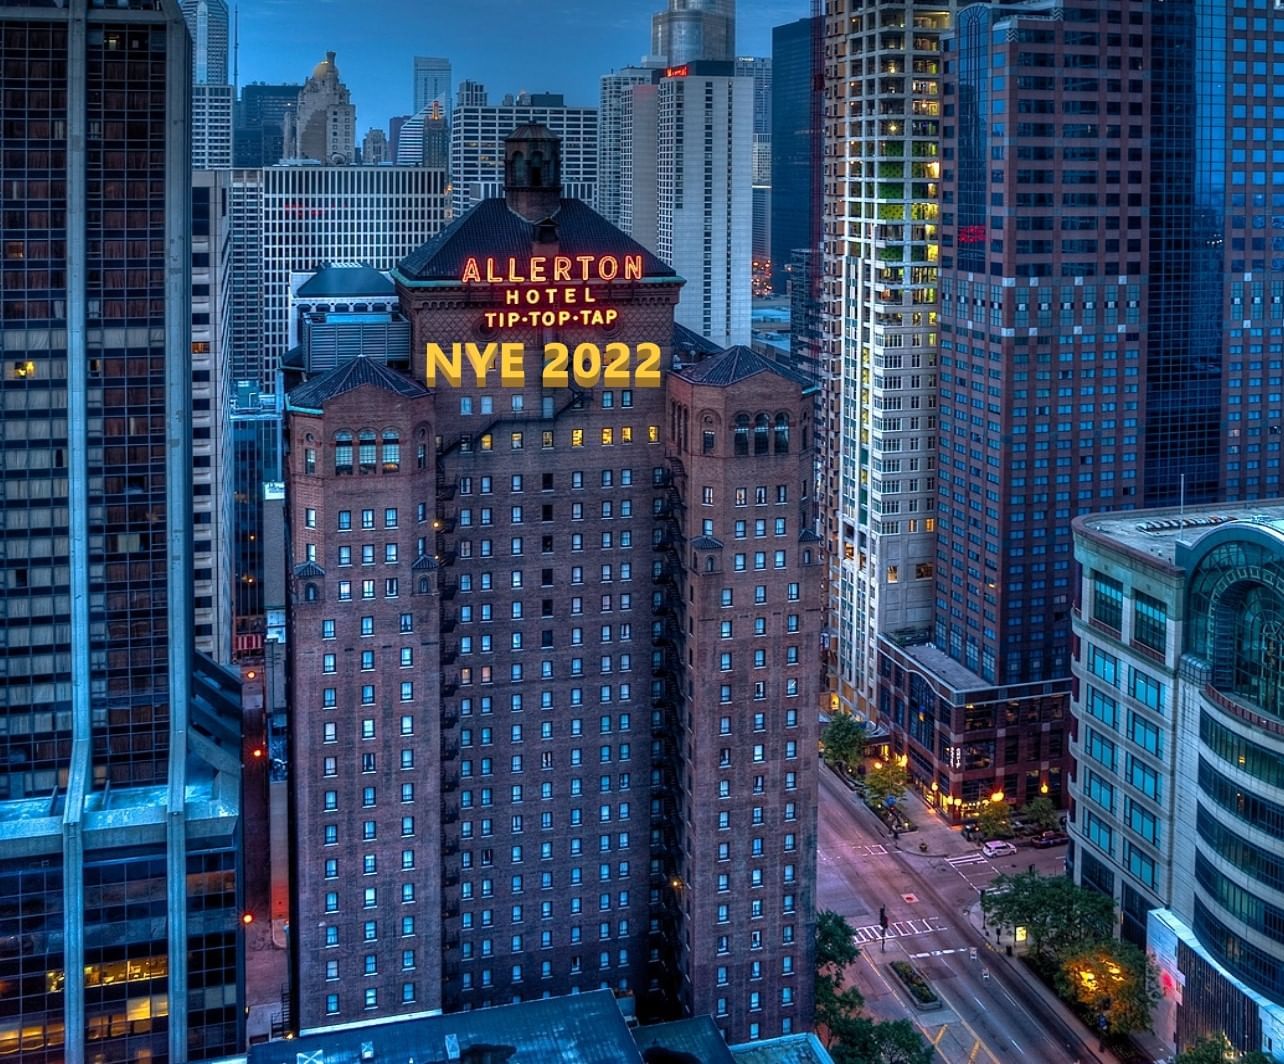 High-angle shot of Warwick Allerton - Chicago Hotel's neon sign at night